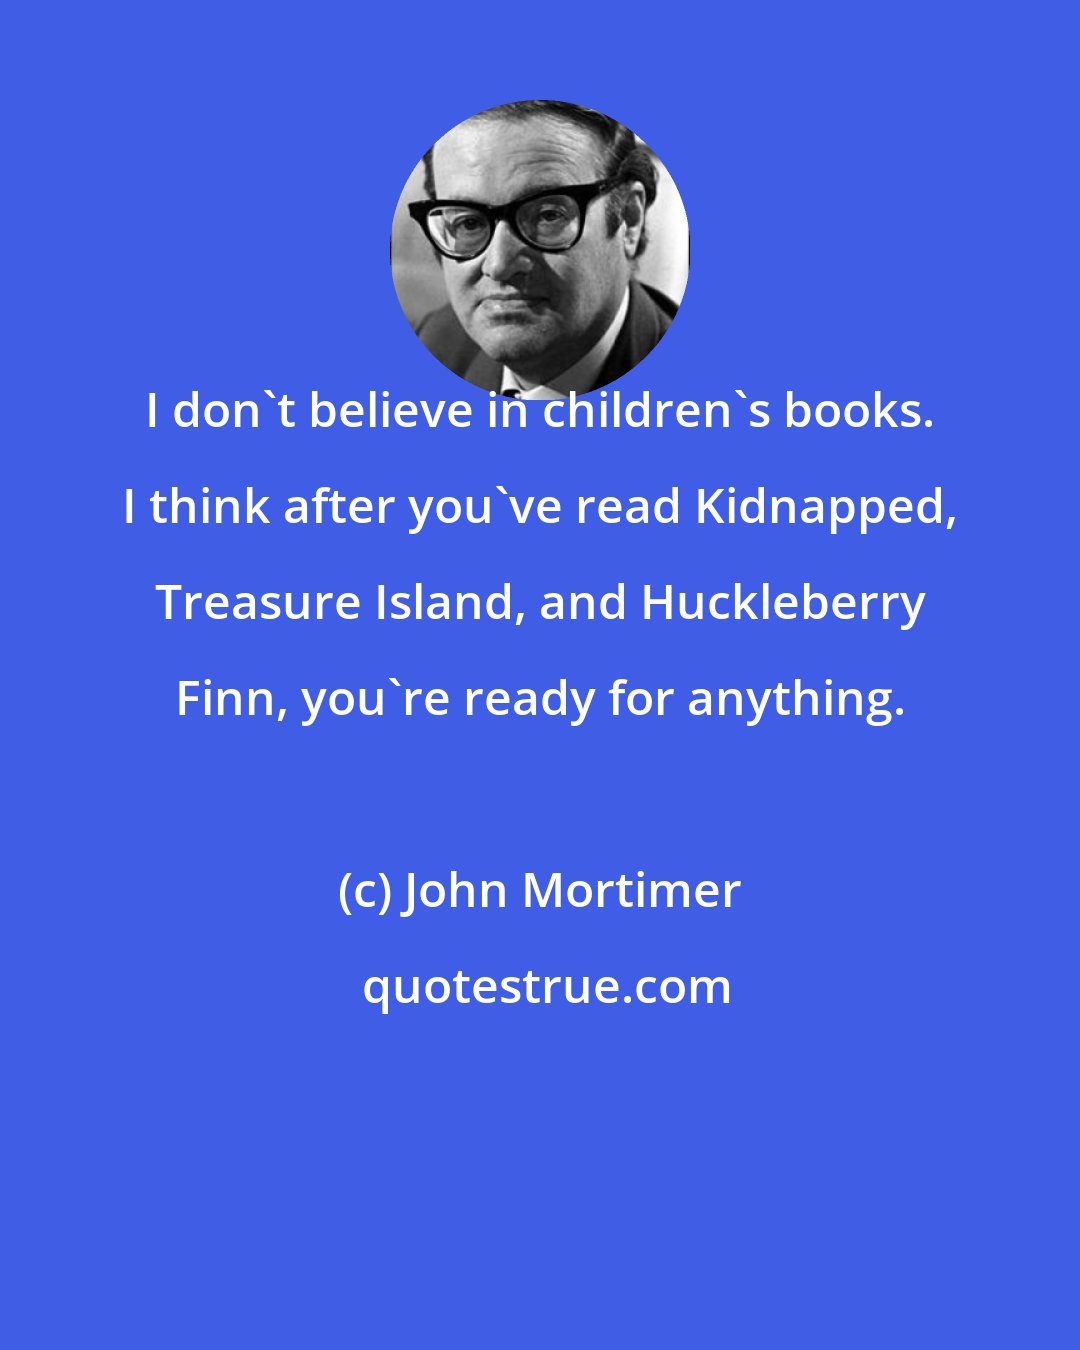 John Mortimer: I don't believe in children's books. I think after you've read Kidnapped, Treasure Island, and Huckleberry Finn, you're ready for anything.